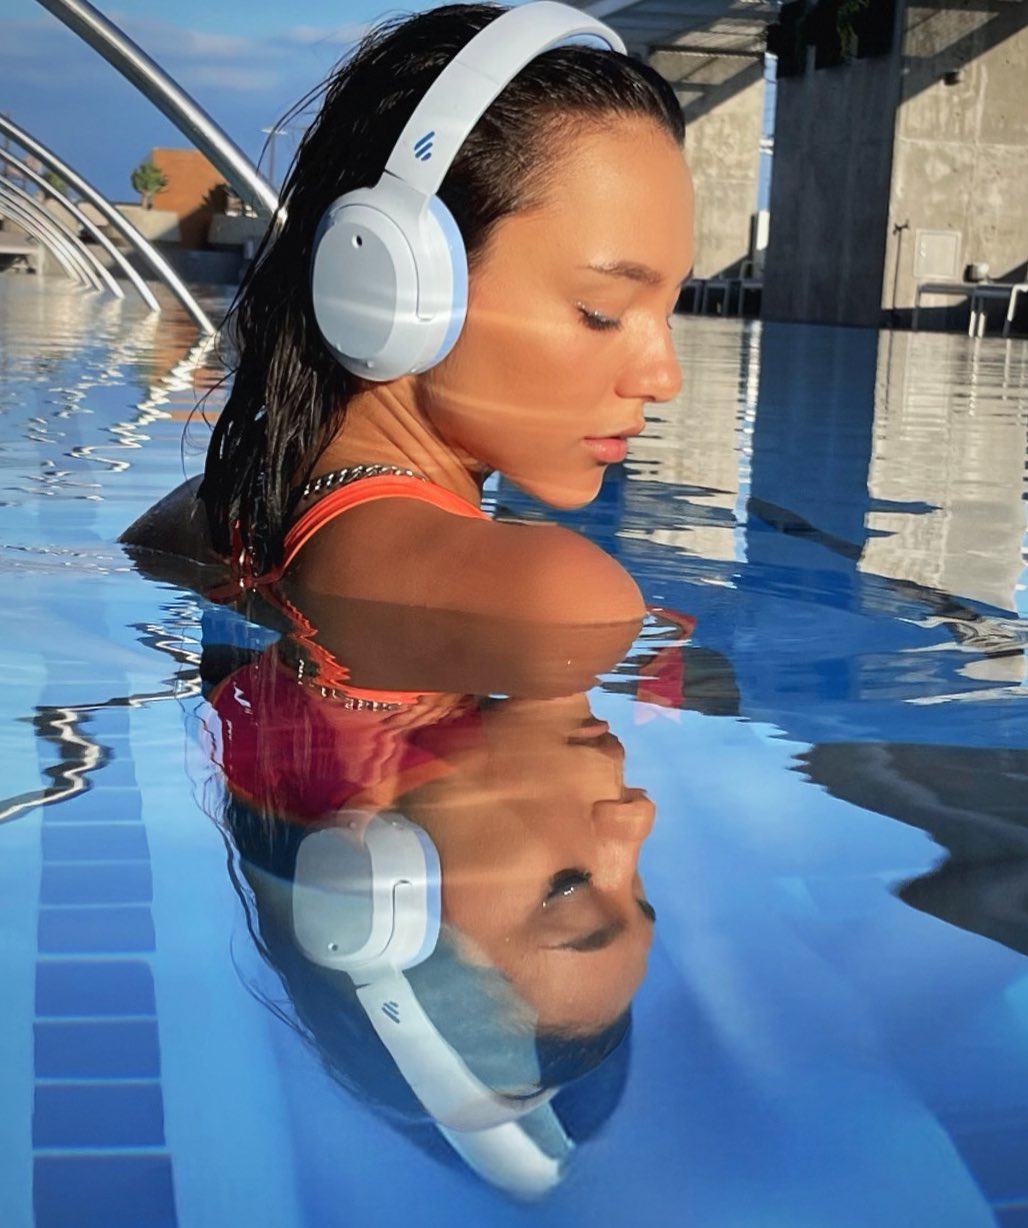 Headphones, Speakers  A Passion for Sound -【Edifier USA】